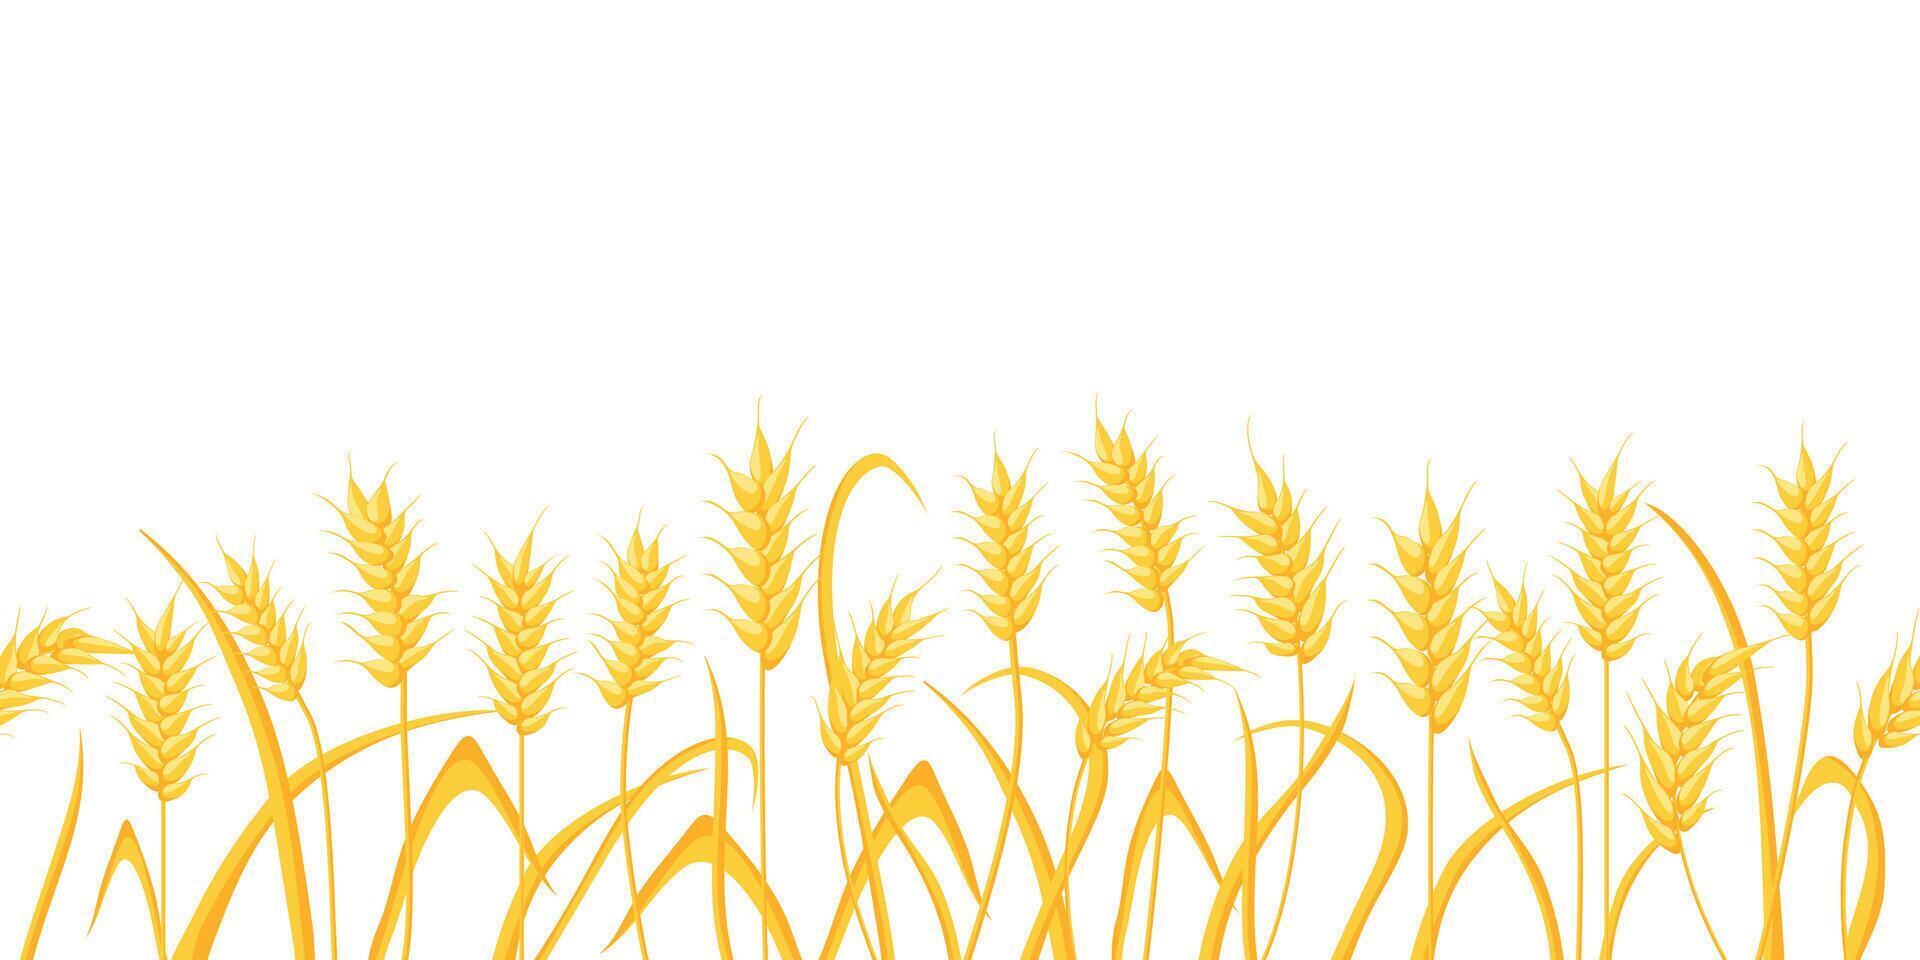 Cartoon farm field background with golden wheat spikes. Agriculture cereal crop ears. Rural scene with grain harvest vector border pattern